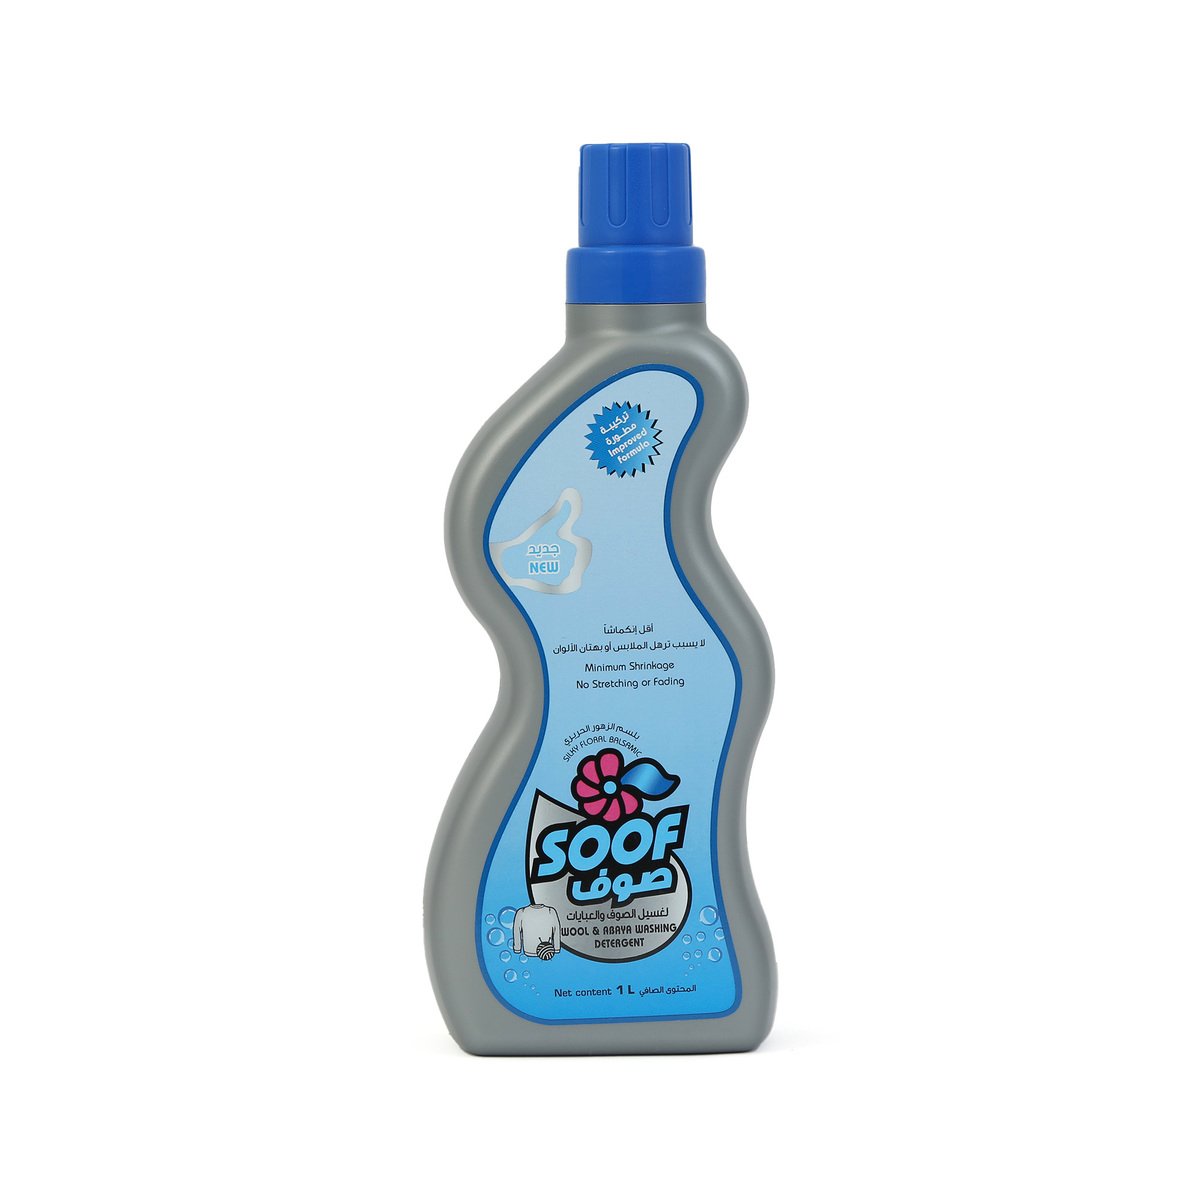 Soof Wool & Abaya Washing Detergent Silky Floral 1Litre